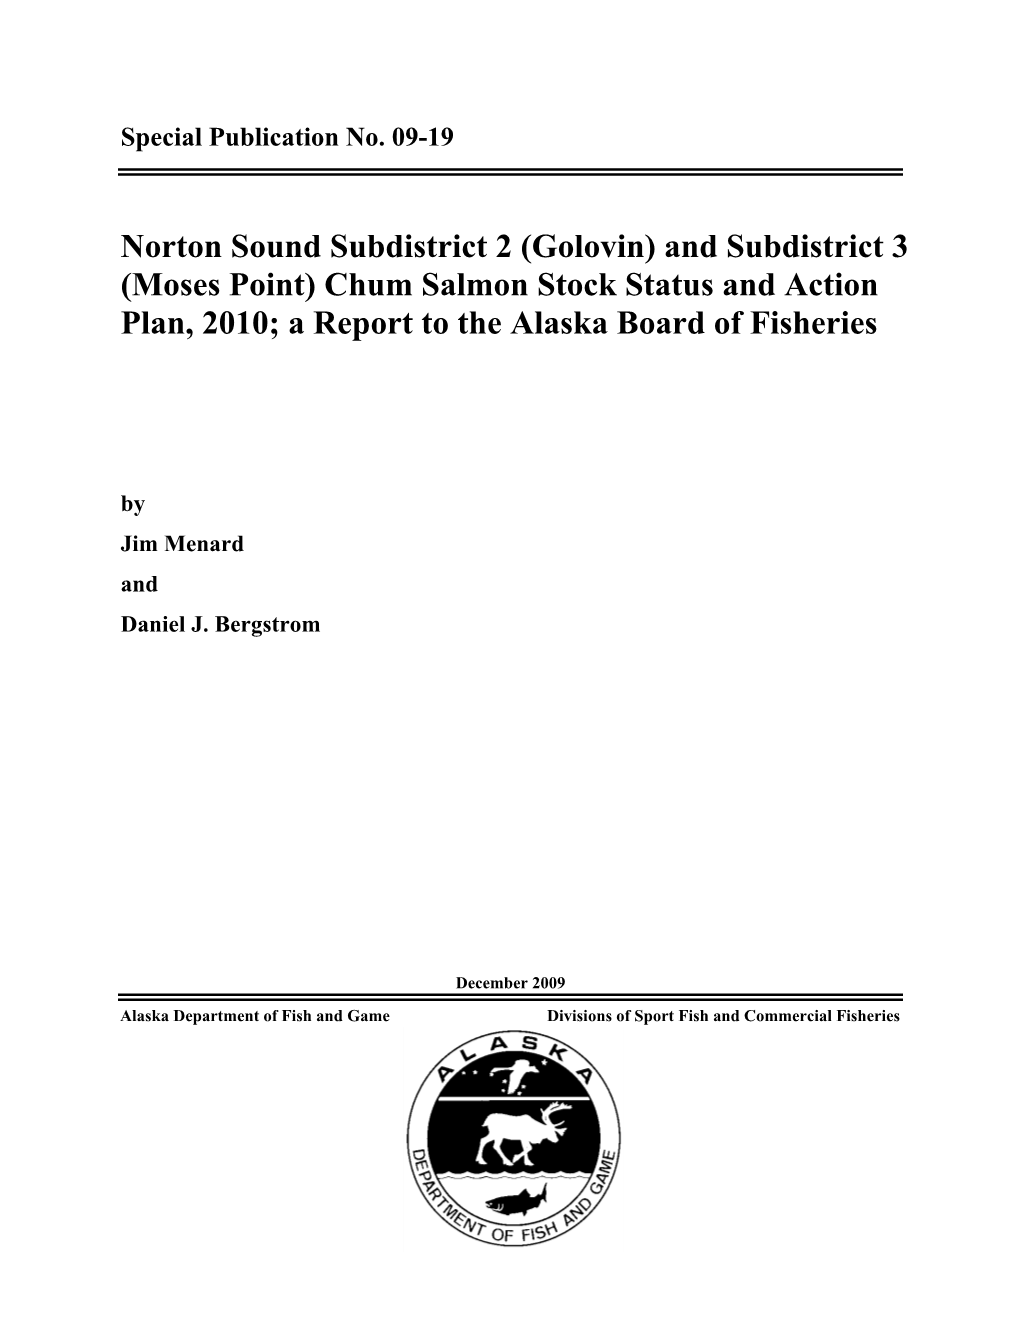 Norton Sound Subdistrict 2 (Golovin) and Subdistrict 3 (Moses Point) Chumsalmon Stock Status and Action Plan, 2010; a Report To